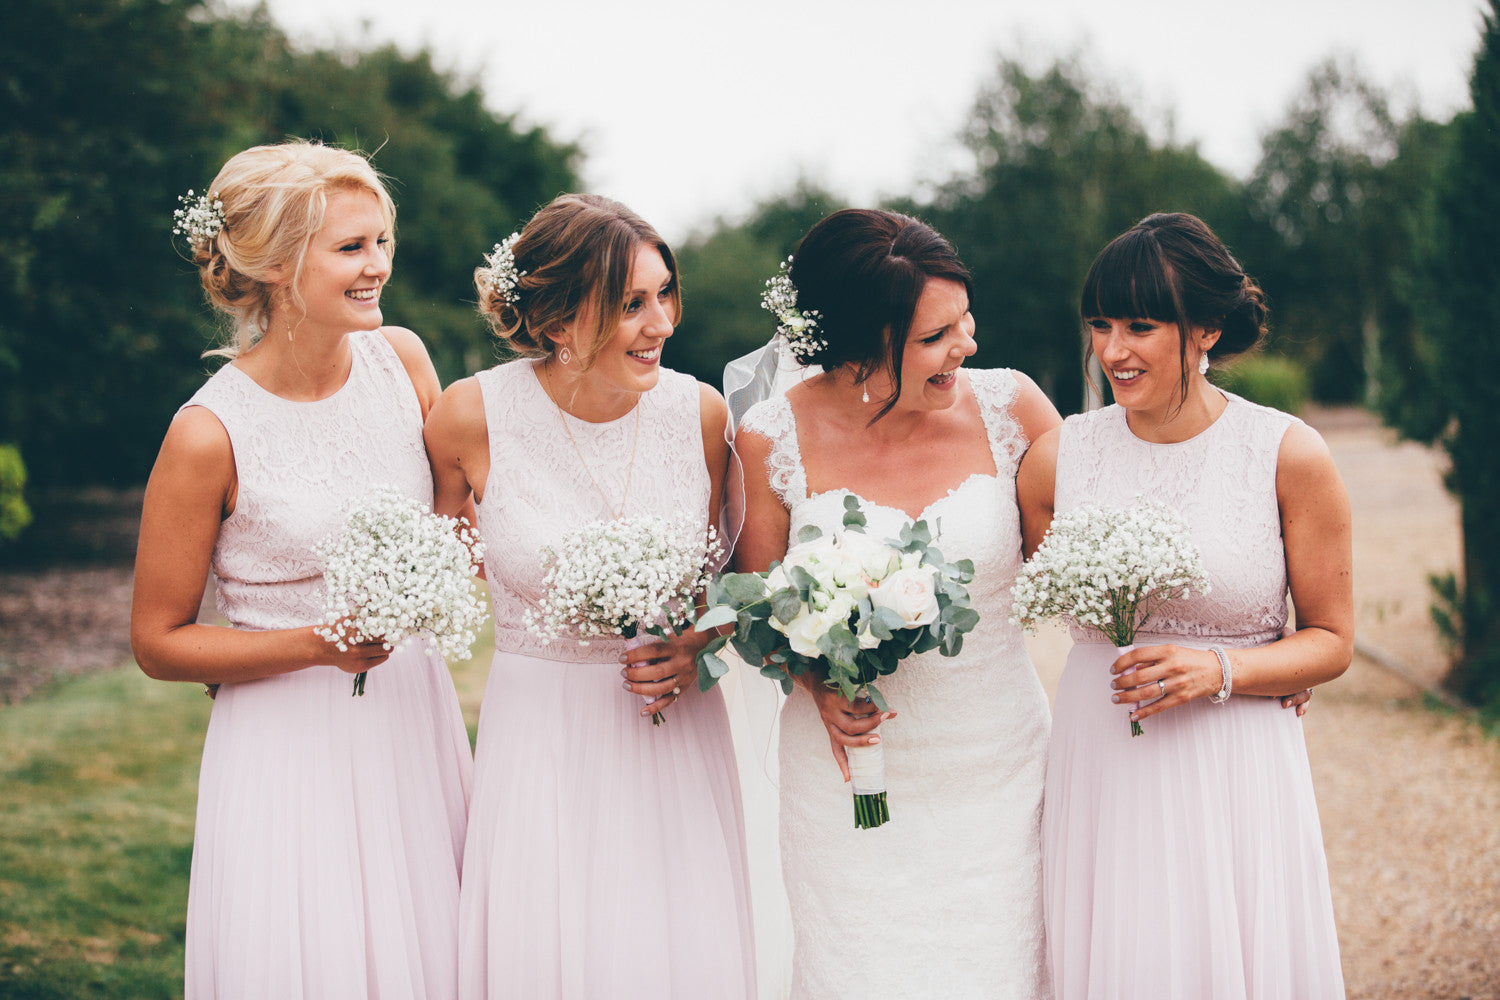 Bride and Bridesmaid's with their wedding flowers in shades of pink and white.